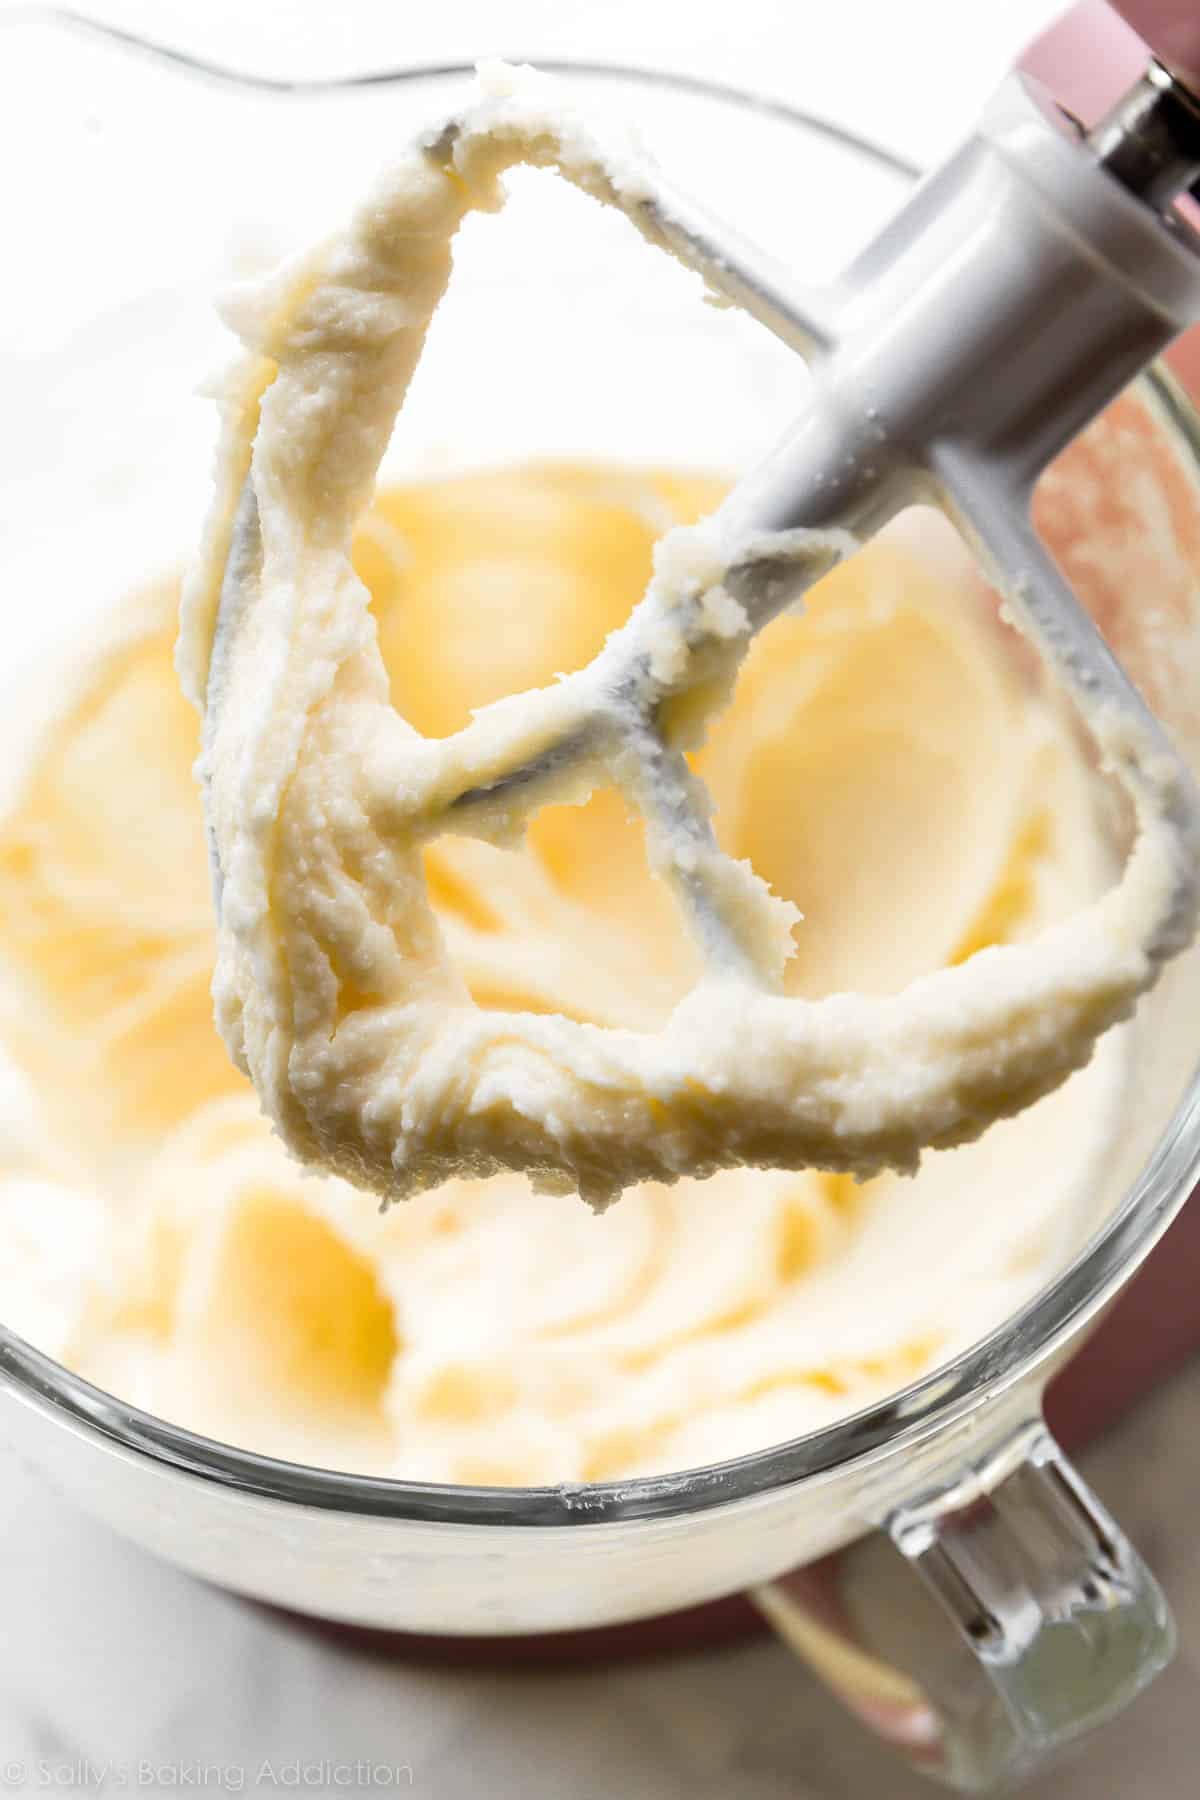 photo showing up-close detail of creamed butter, sugar, and oil mixture on flat beater attachment.